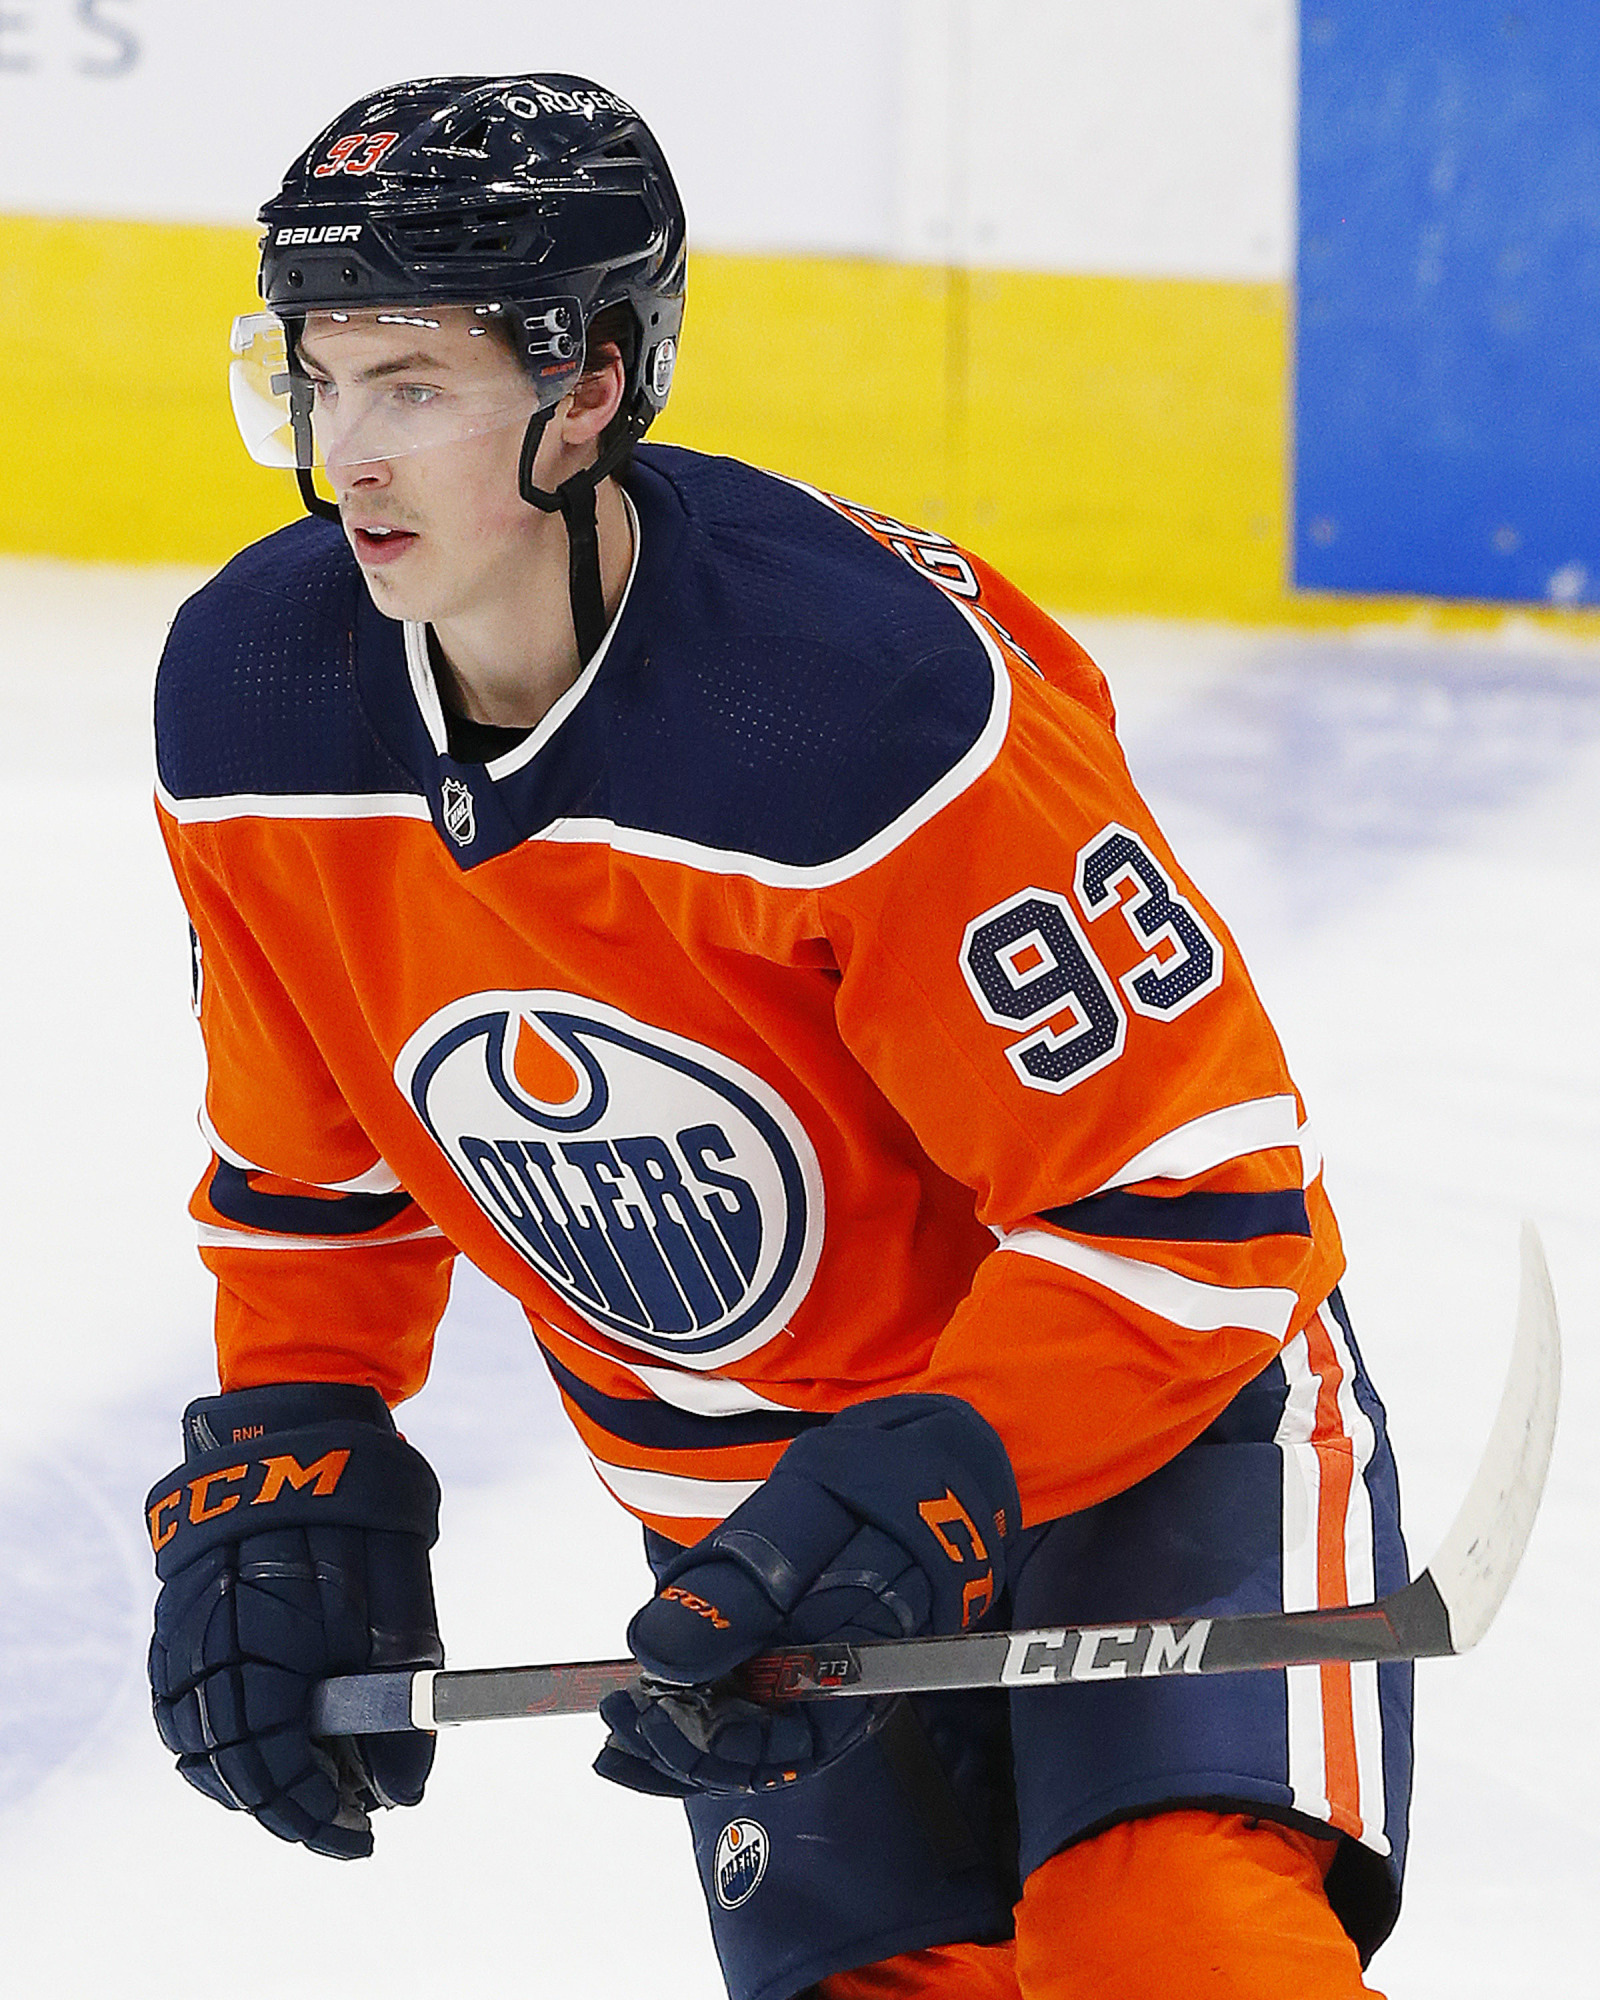 Oilers forward Ryan Nugent-Hopkins geared up for Fury Stakes on July 5 at  Woodbine